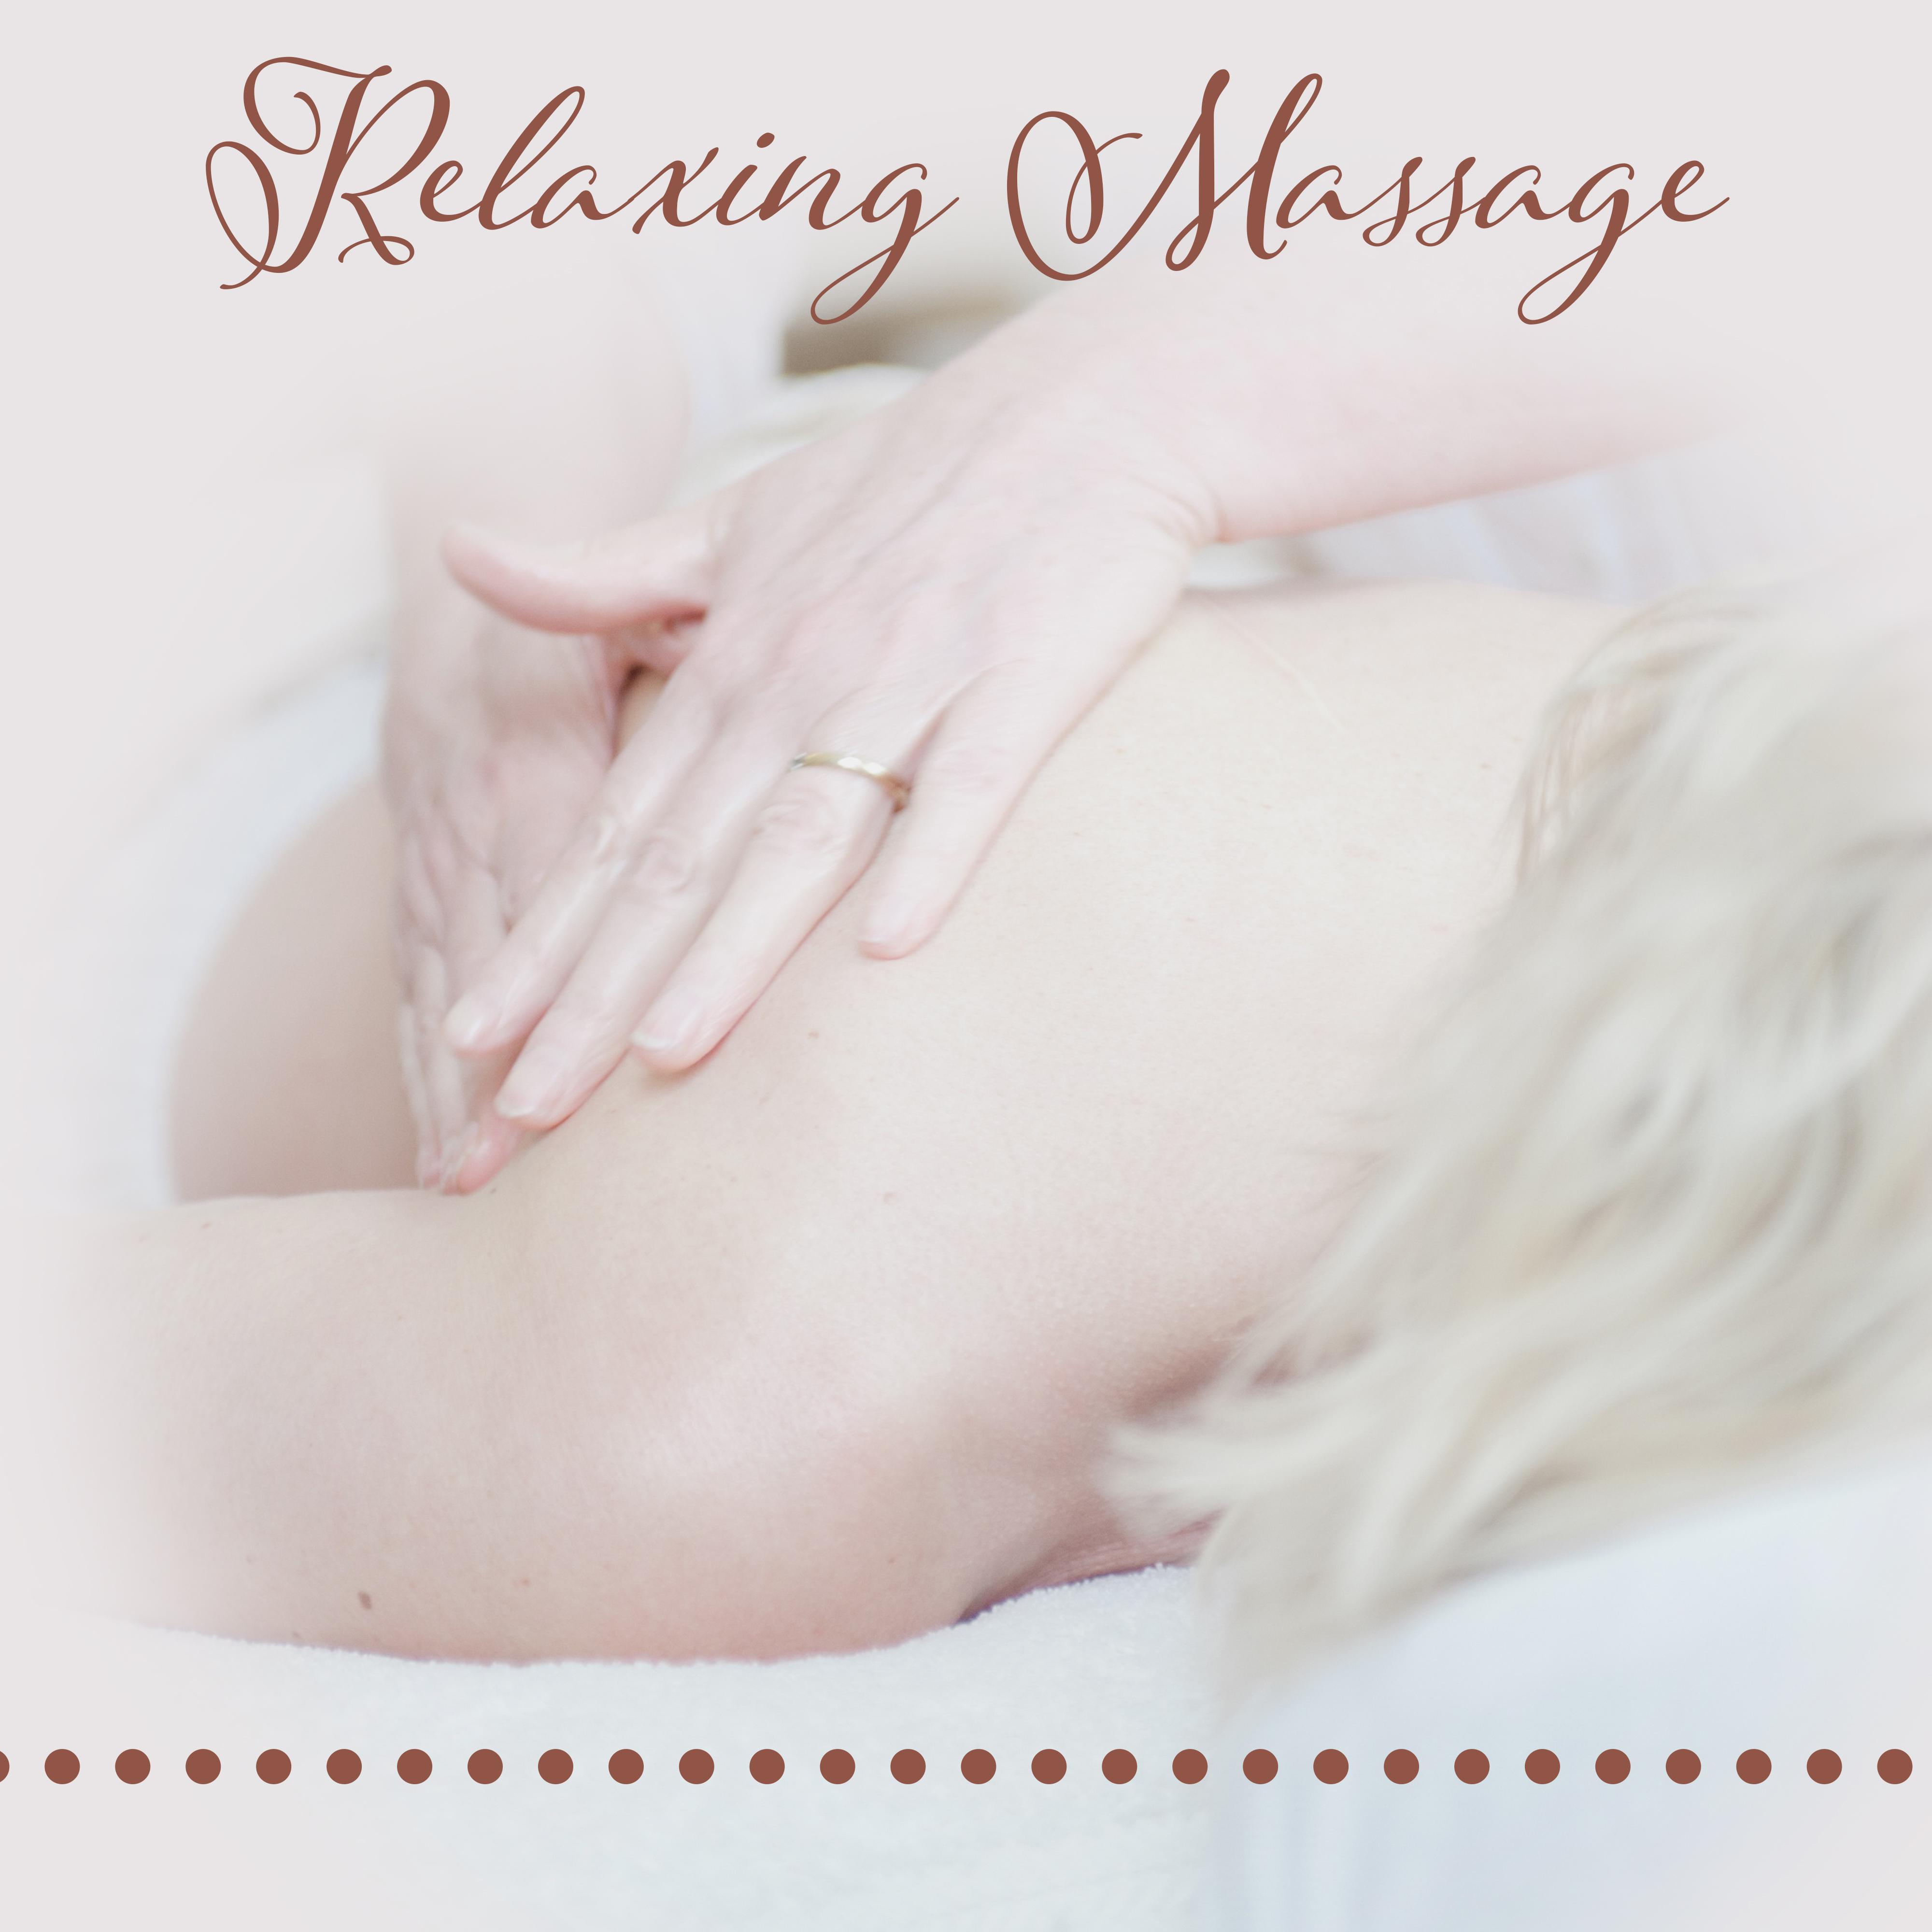 Relaxing Massage – Spa Music Collection, Instrumental New Age, Sounds of Nature, Relaxing Music, Hotel Spa Music Background